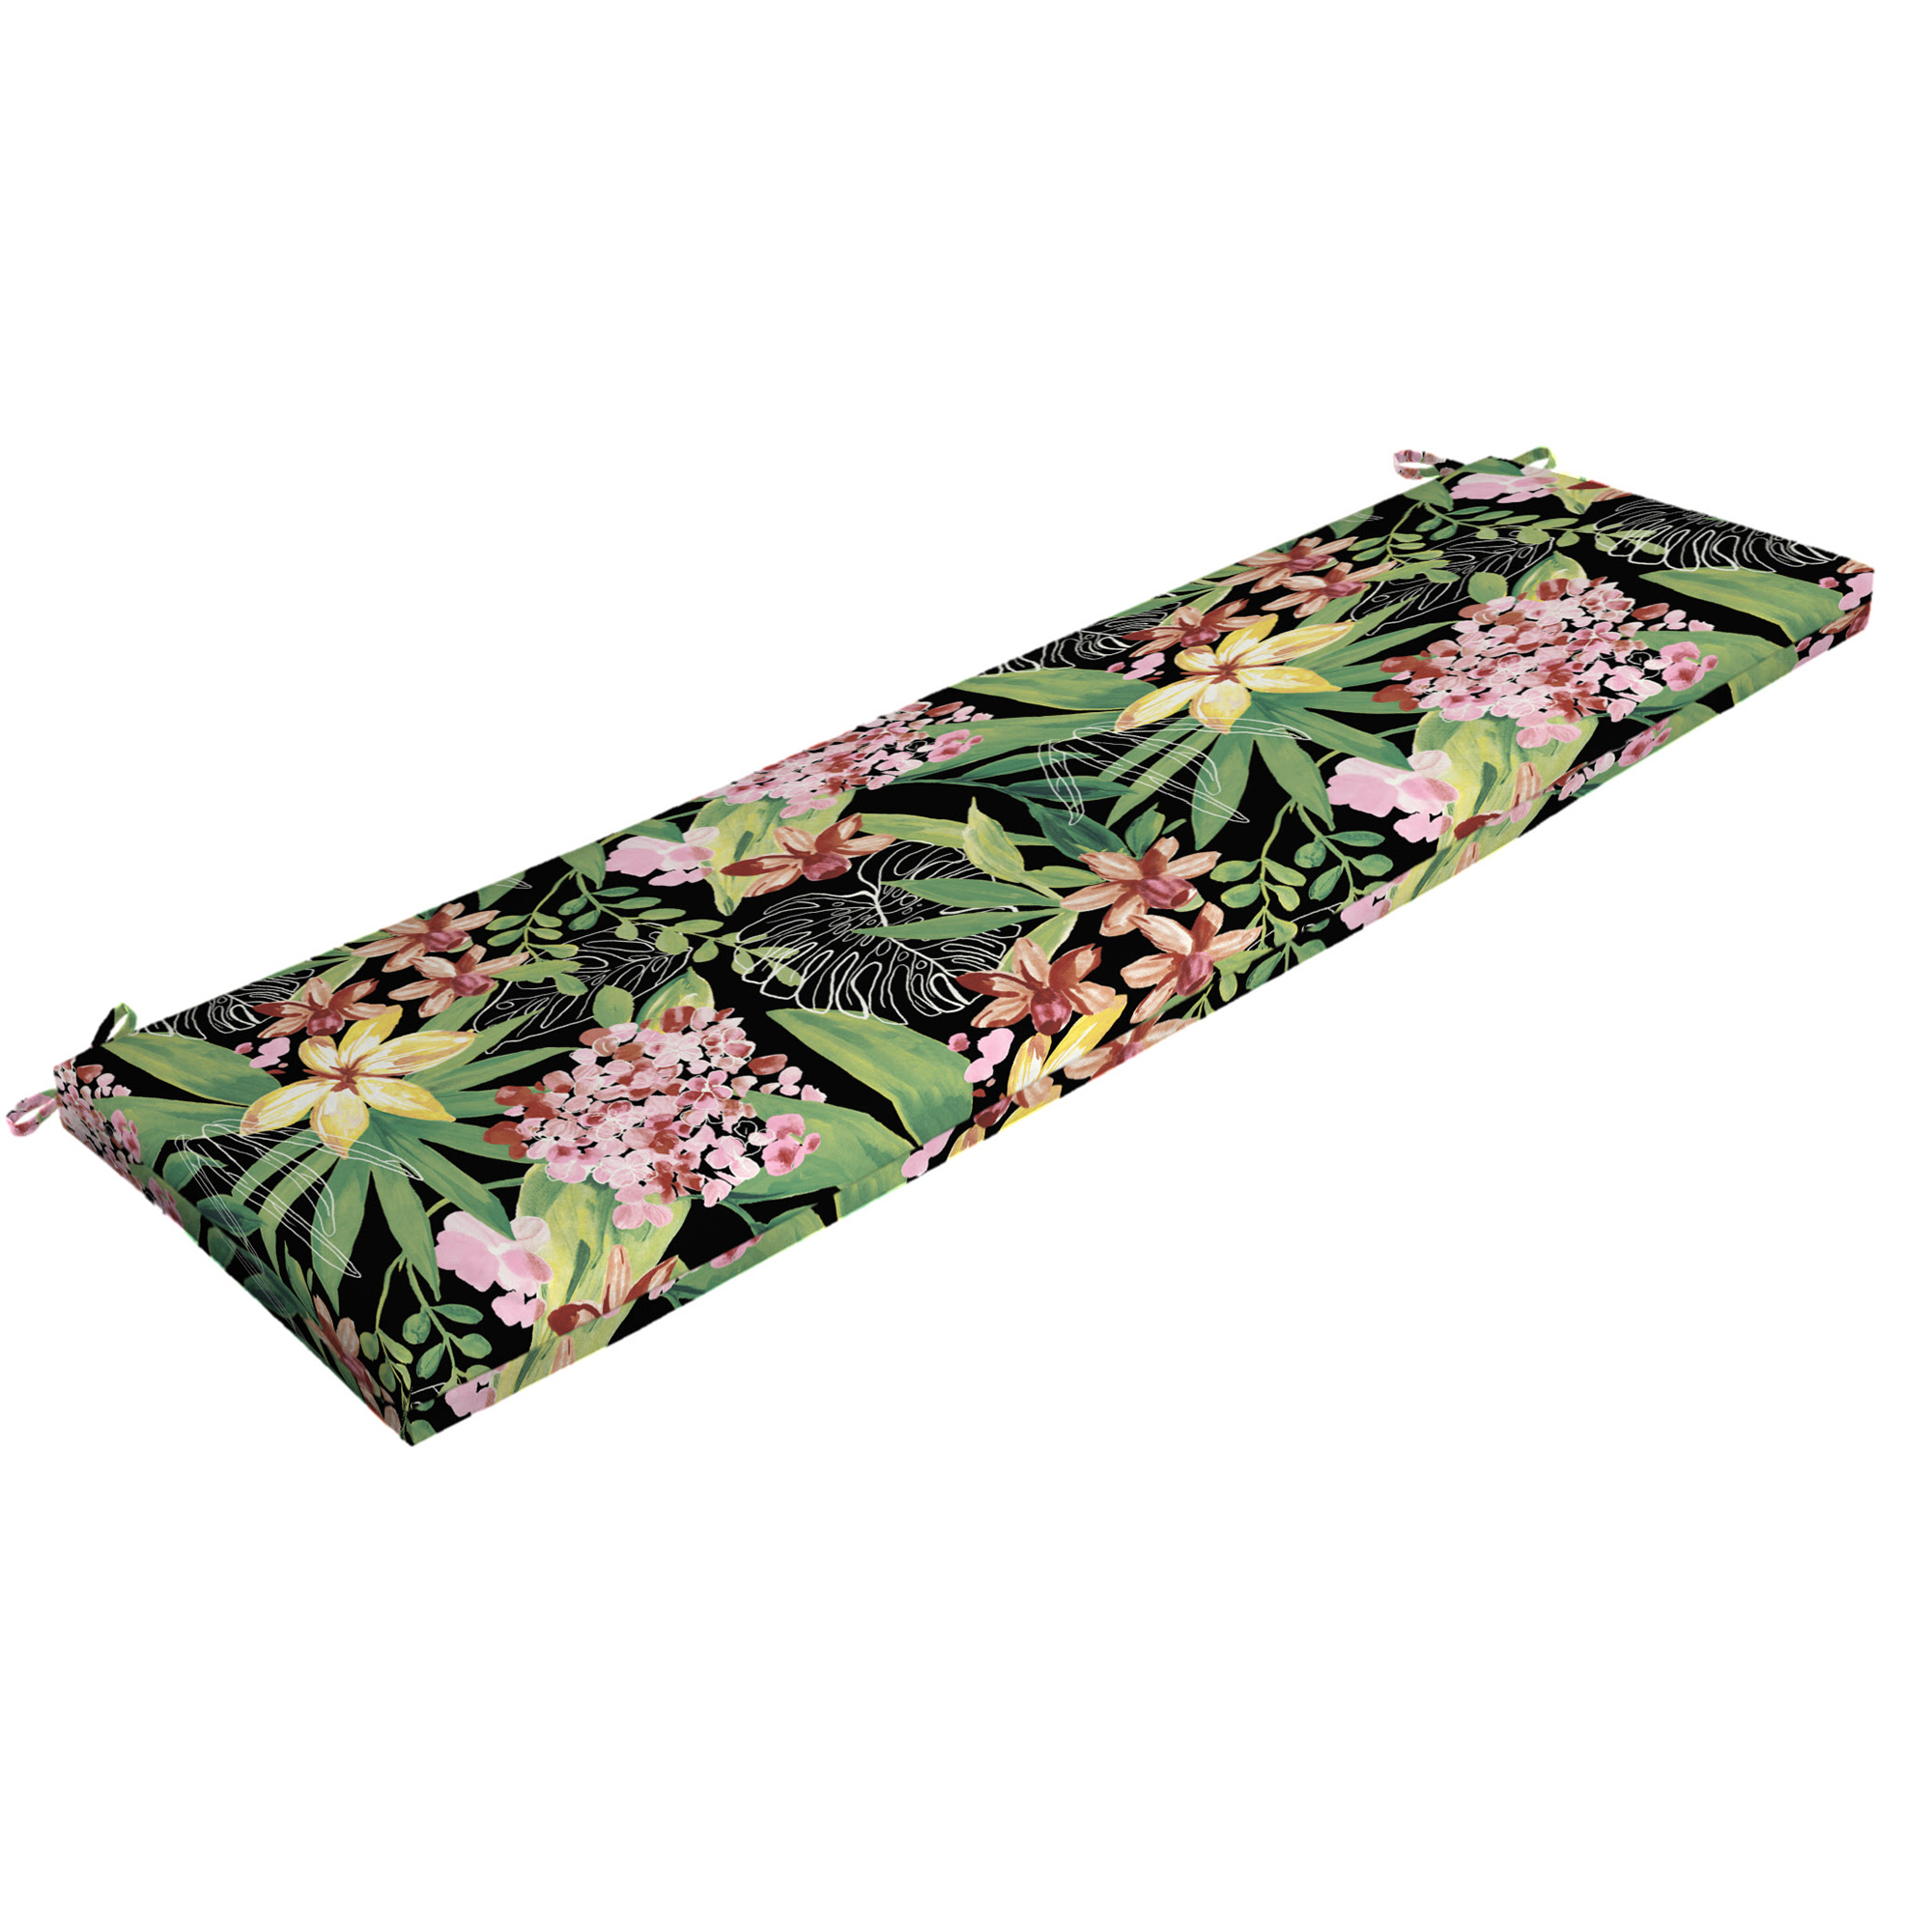 Better Homes & Gardens Black Tropical 17" x 46" Outdoor Bench Cushion - image 1 of 8